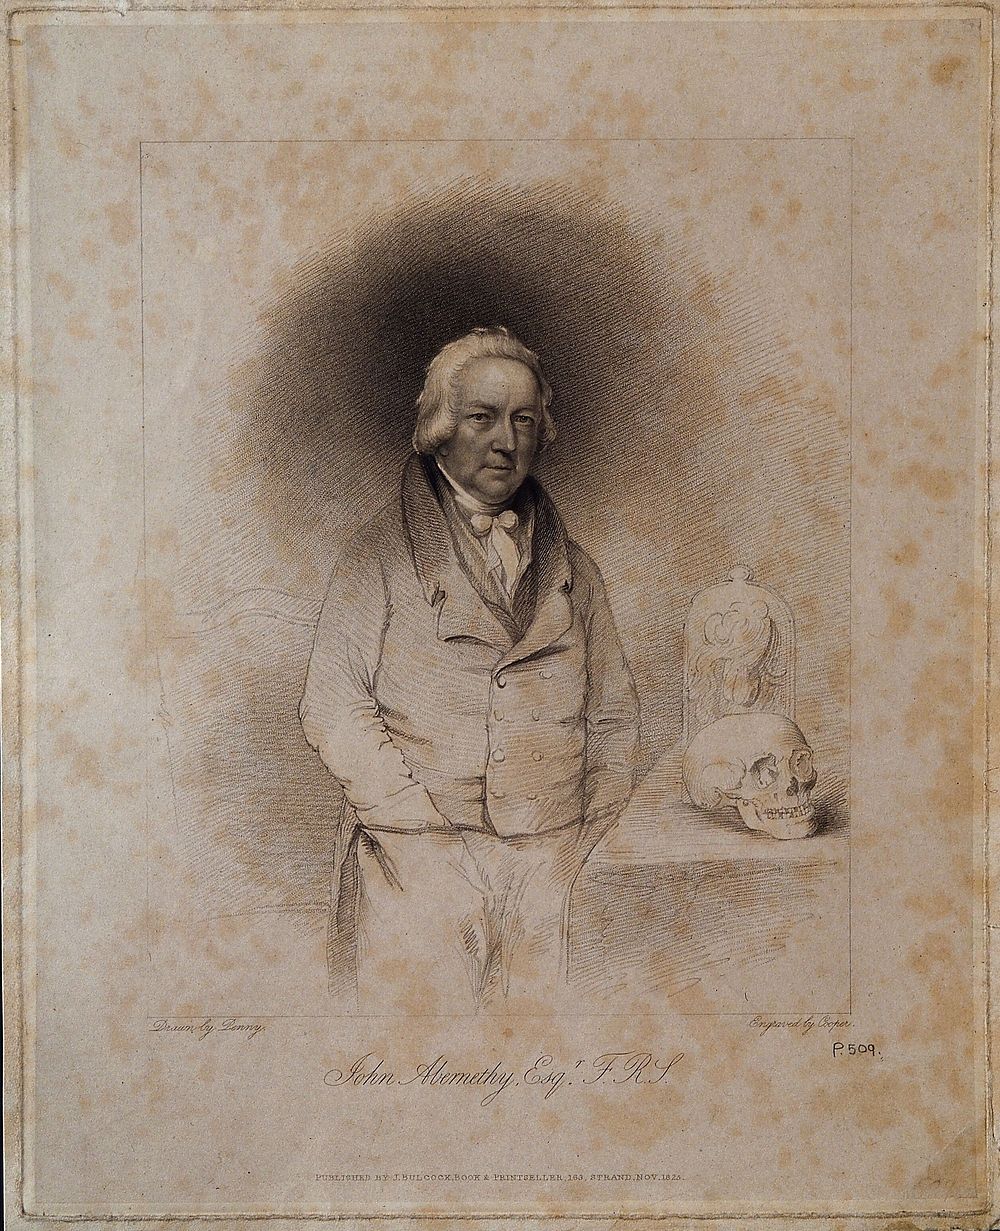 John Abernethy. Stipple engraving by R. Cooper, 1825, after C. Penny.